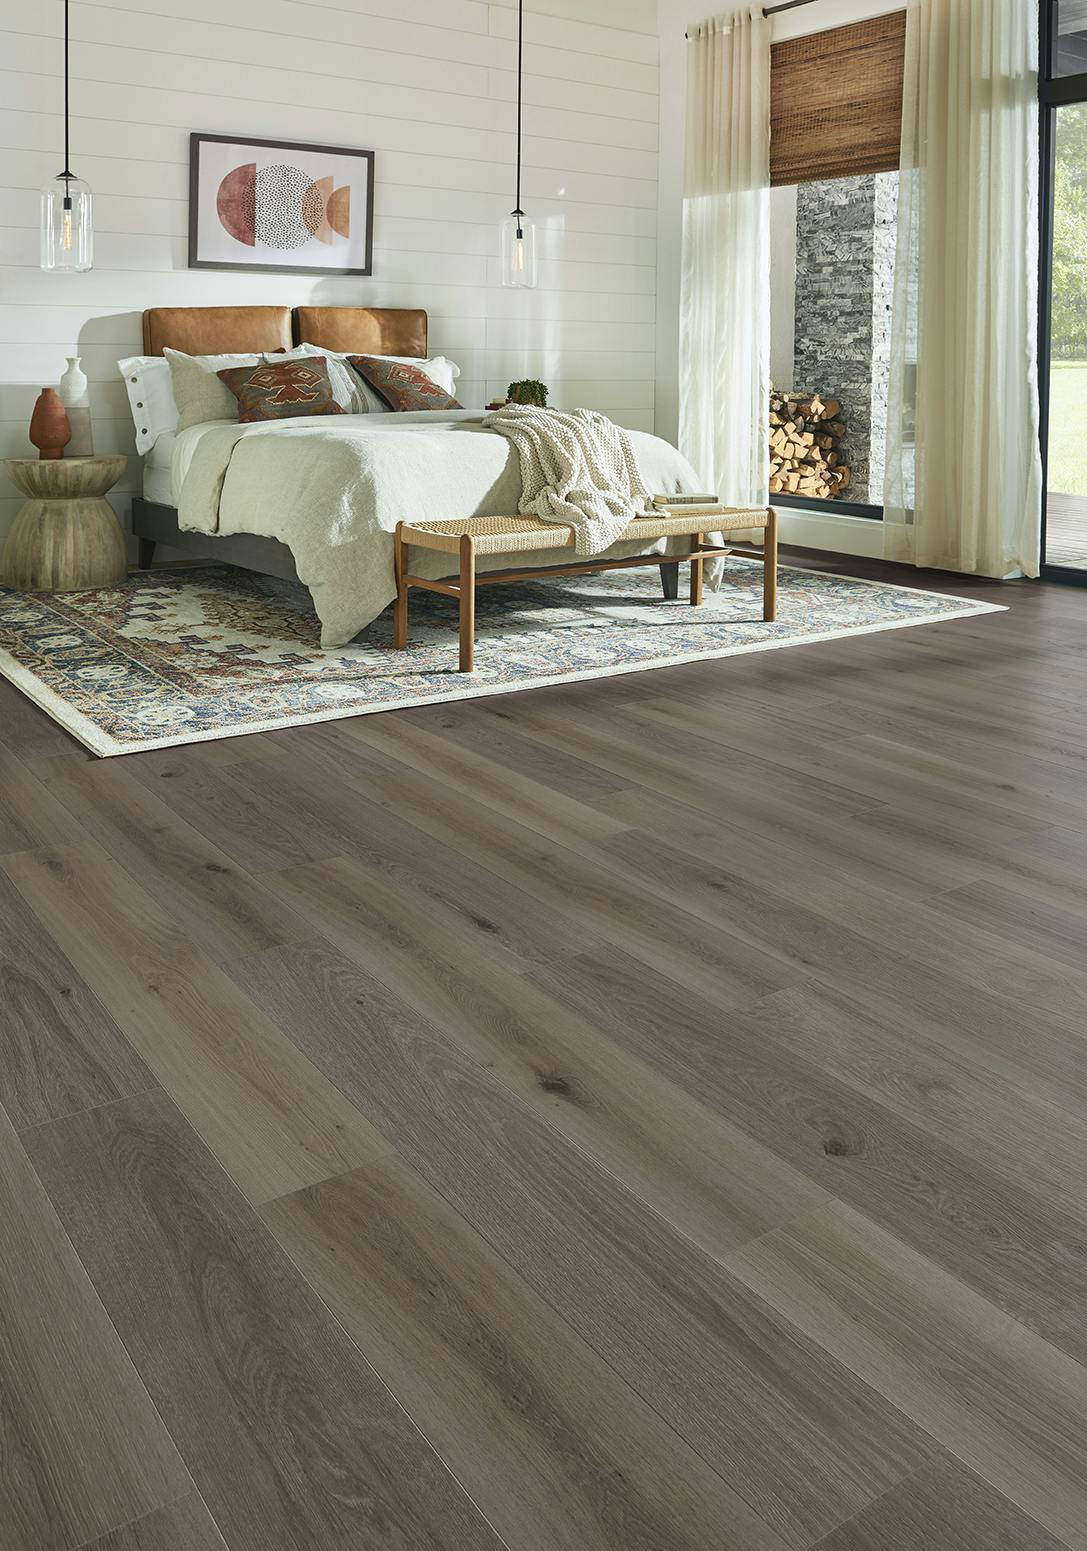 Blog Post Ultimate Guide to Laminate Flooring Image 